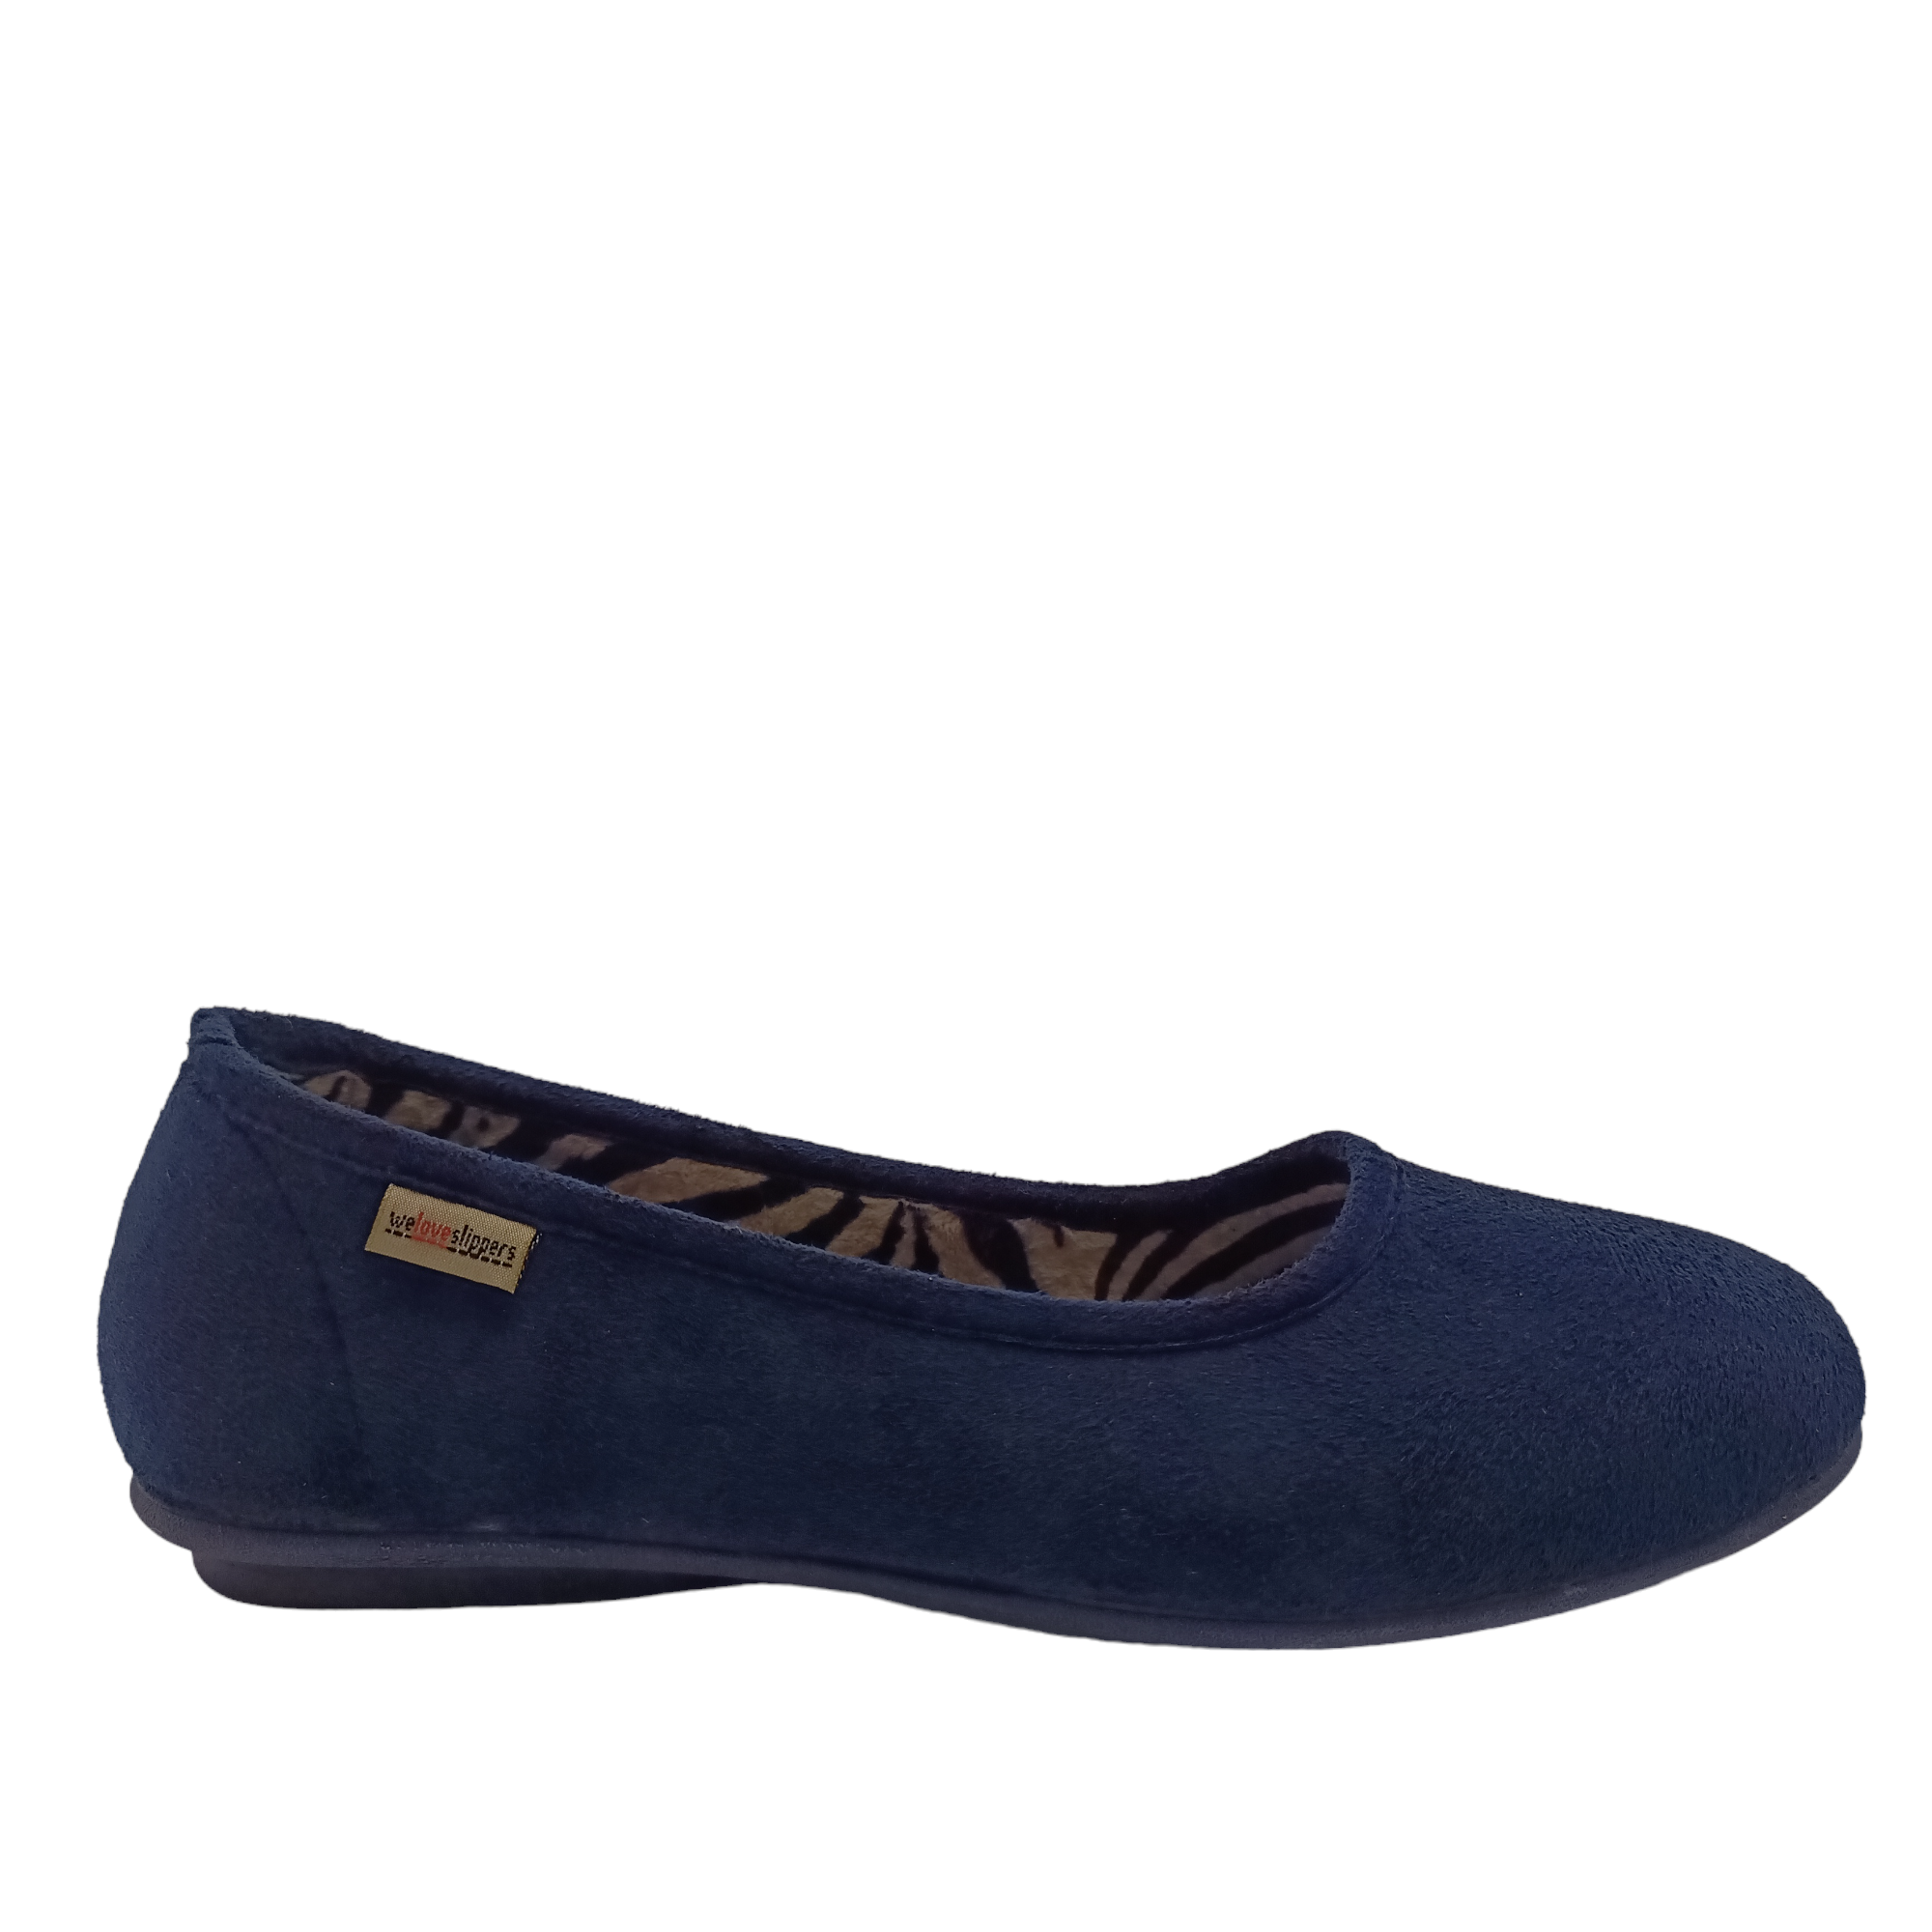 Front view of navy Nuzzle Slippers with zebra print lining. Shop Womens Slippers and Shoes Online and In-store with shoe&amp;me.